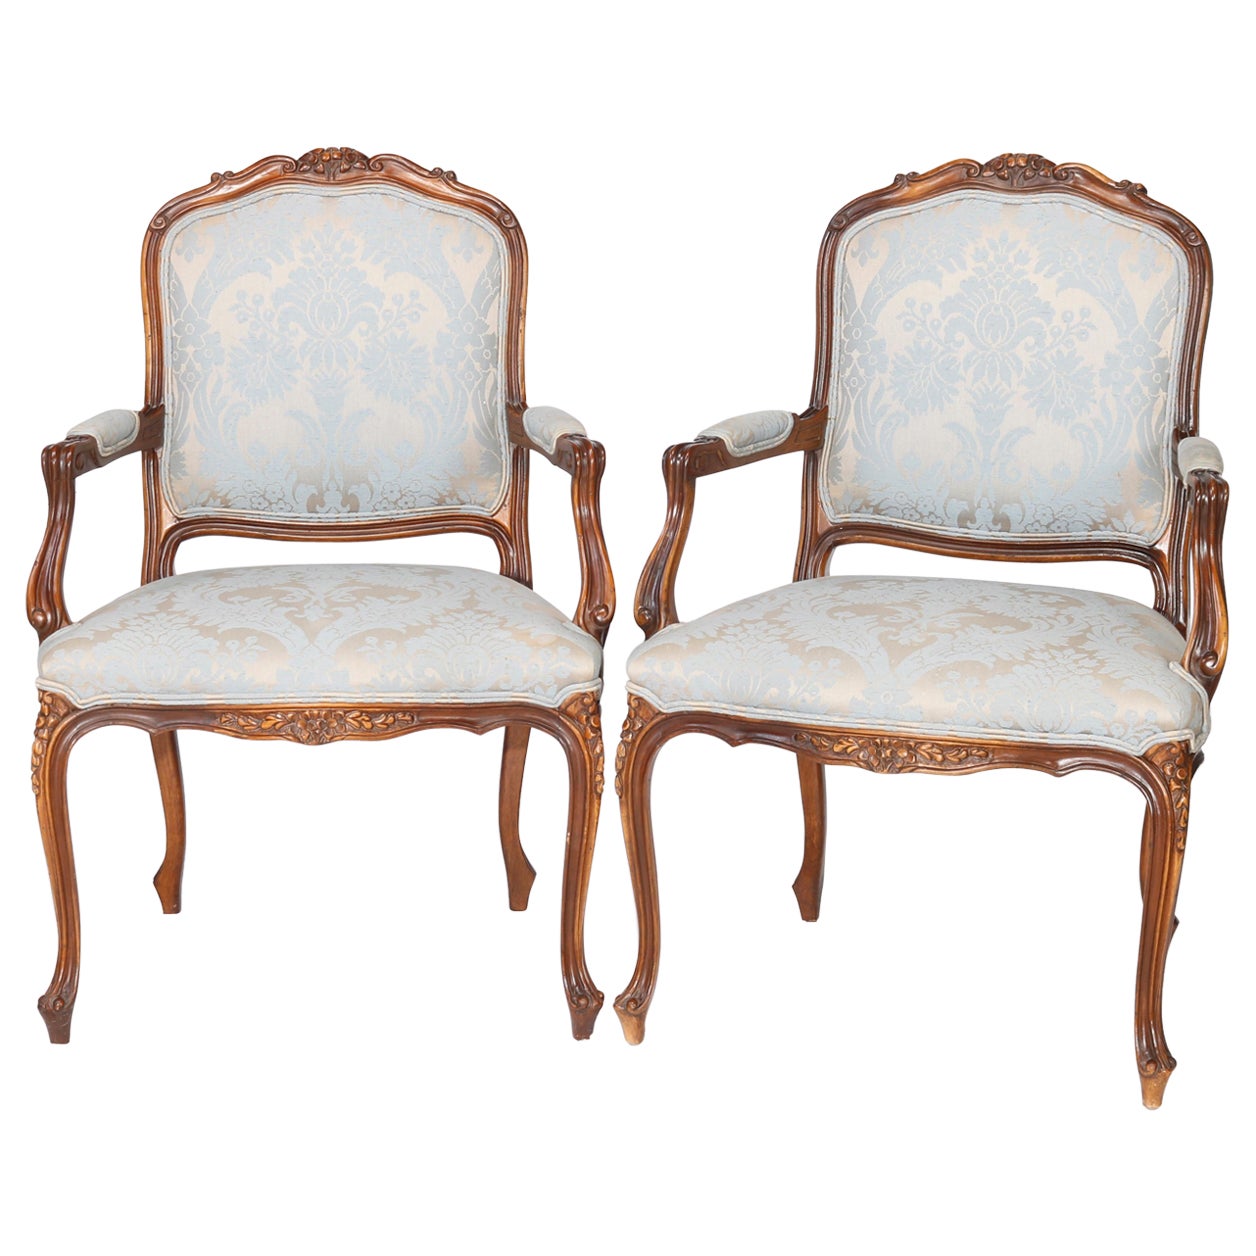 Pair French LouisXV Style Carved Fruitwood Fauteuil Arm Chairs 20th C